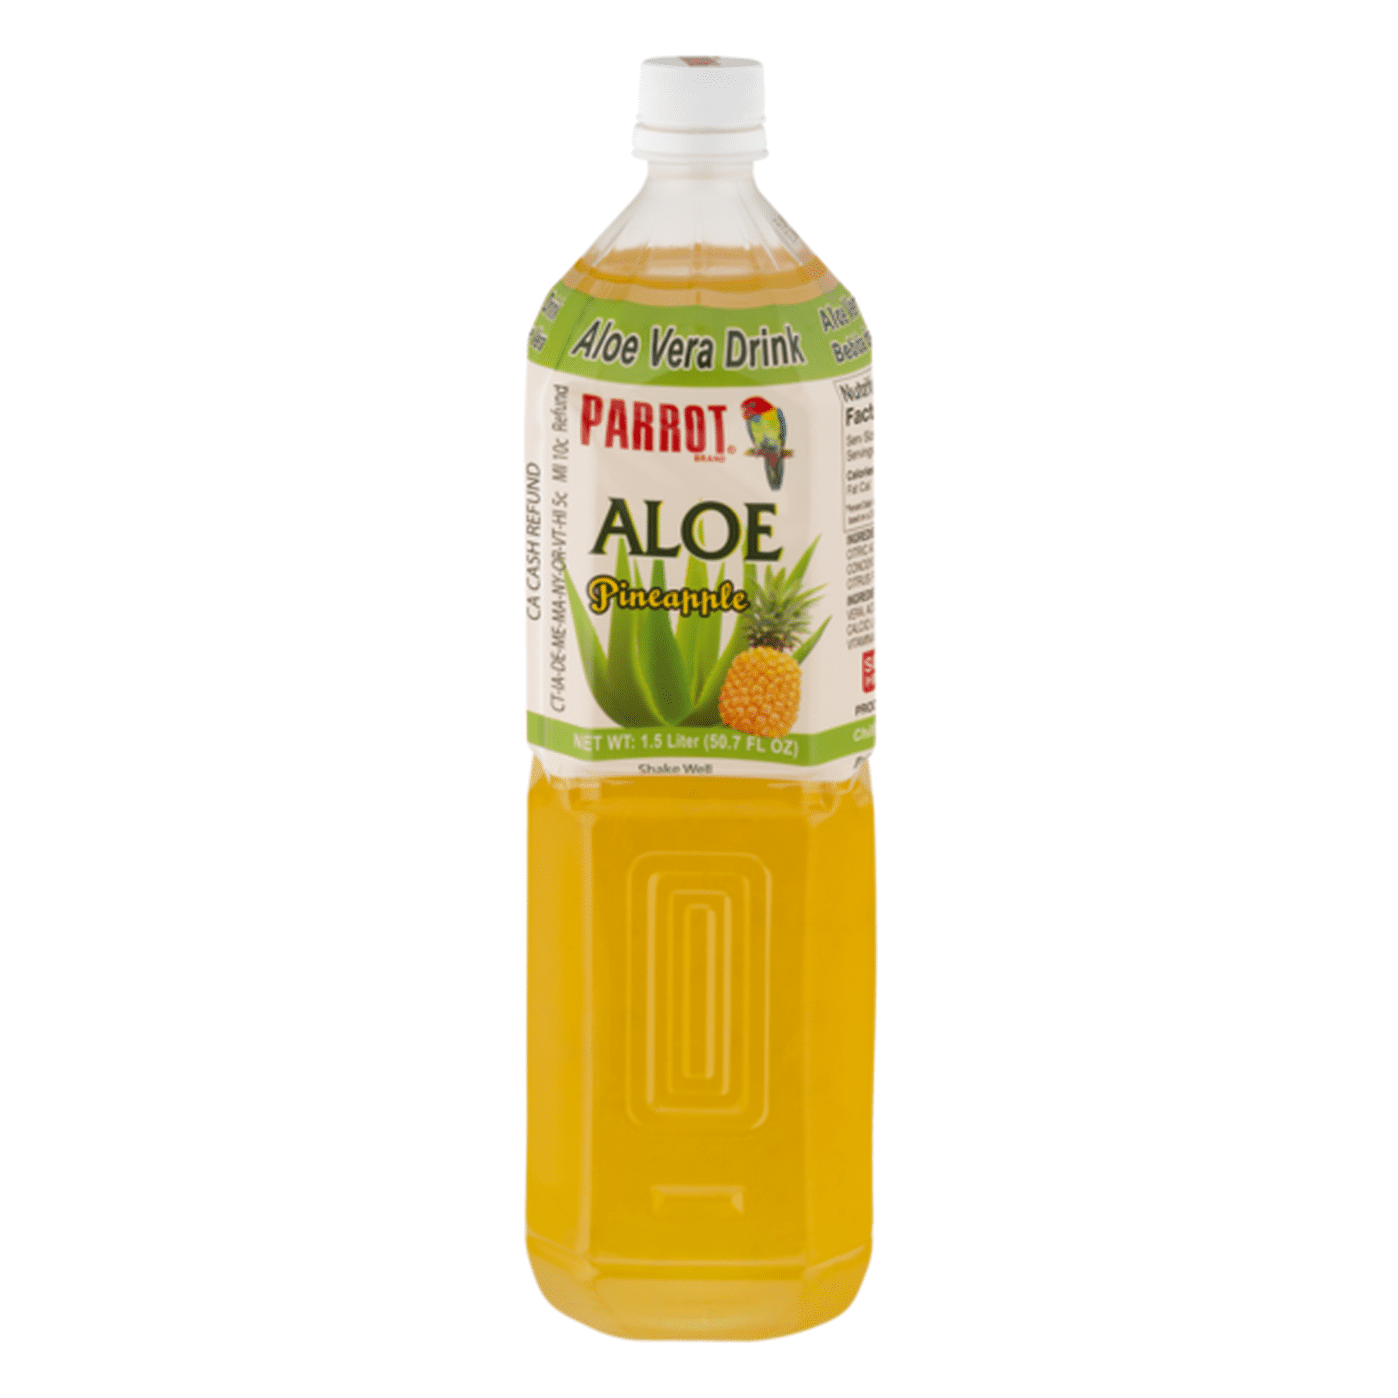 Parrot Aloe Vera Drink Pineapple 15 L Delivery Or Pickup Near Me Instacart 9041